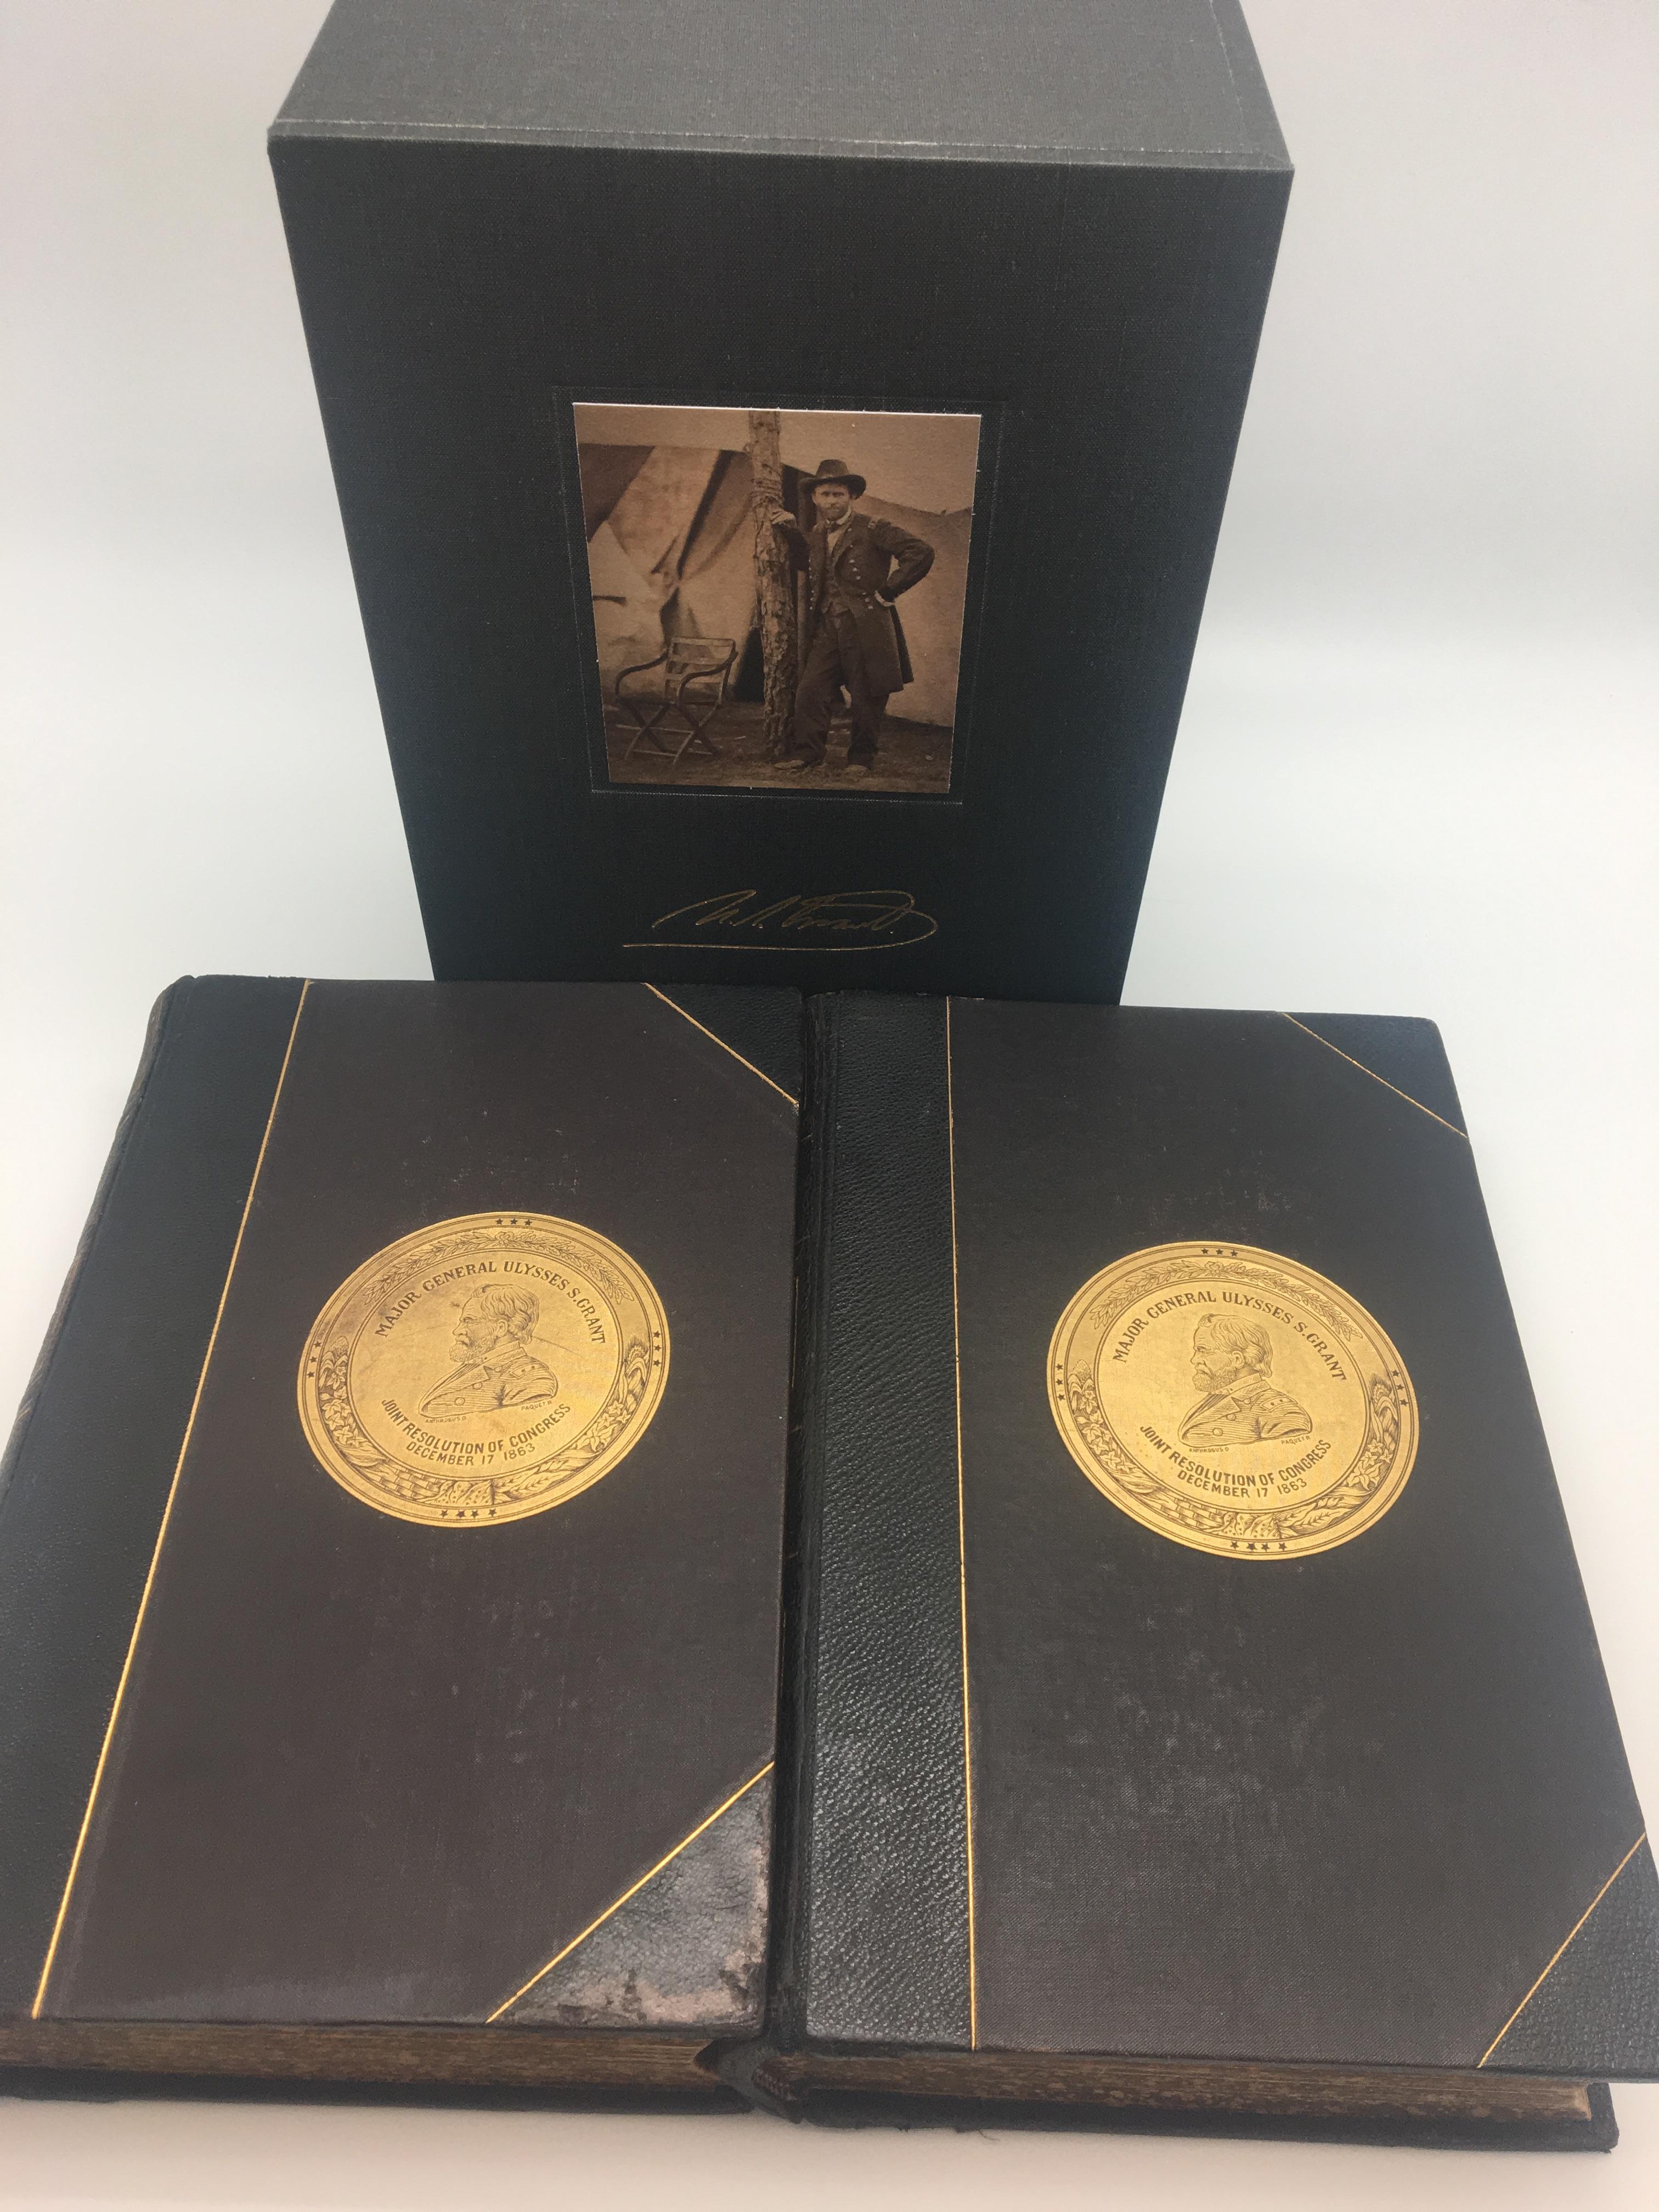 personal memoirs of u.s. grant first edition